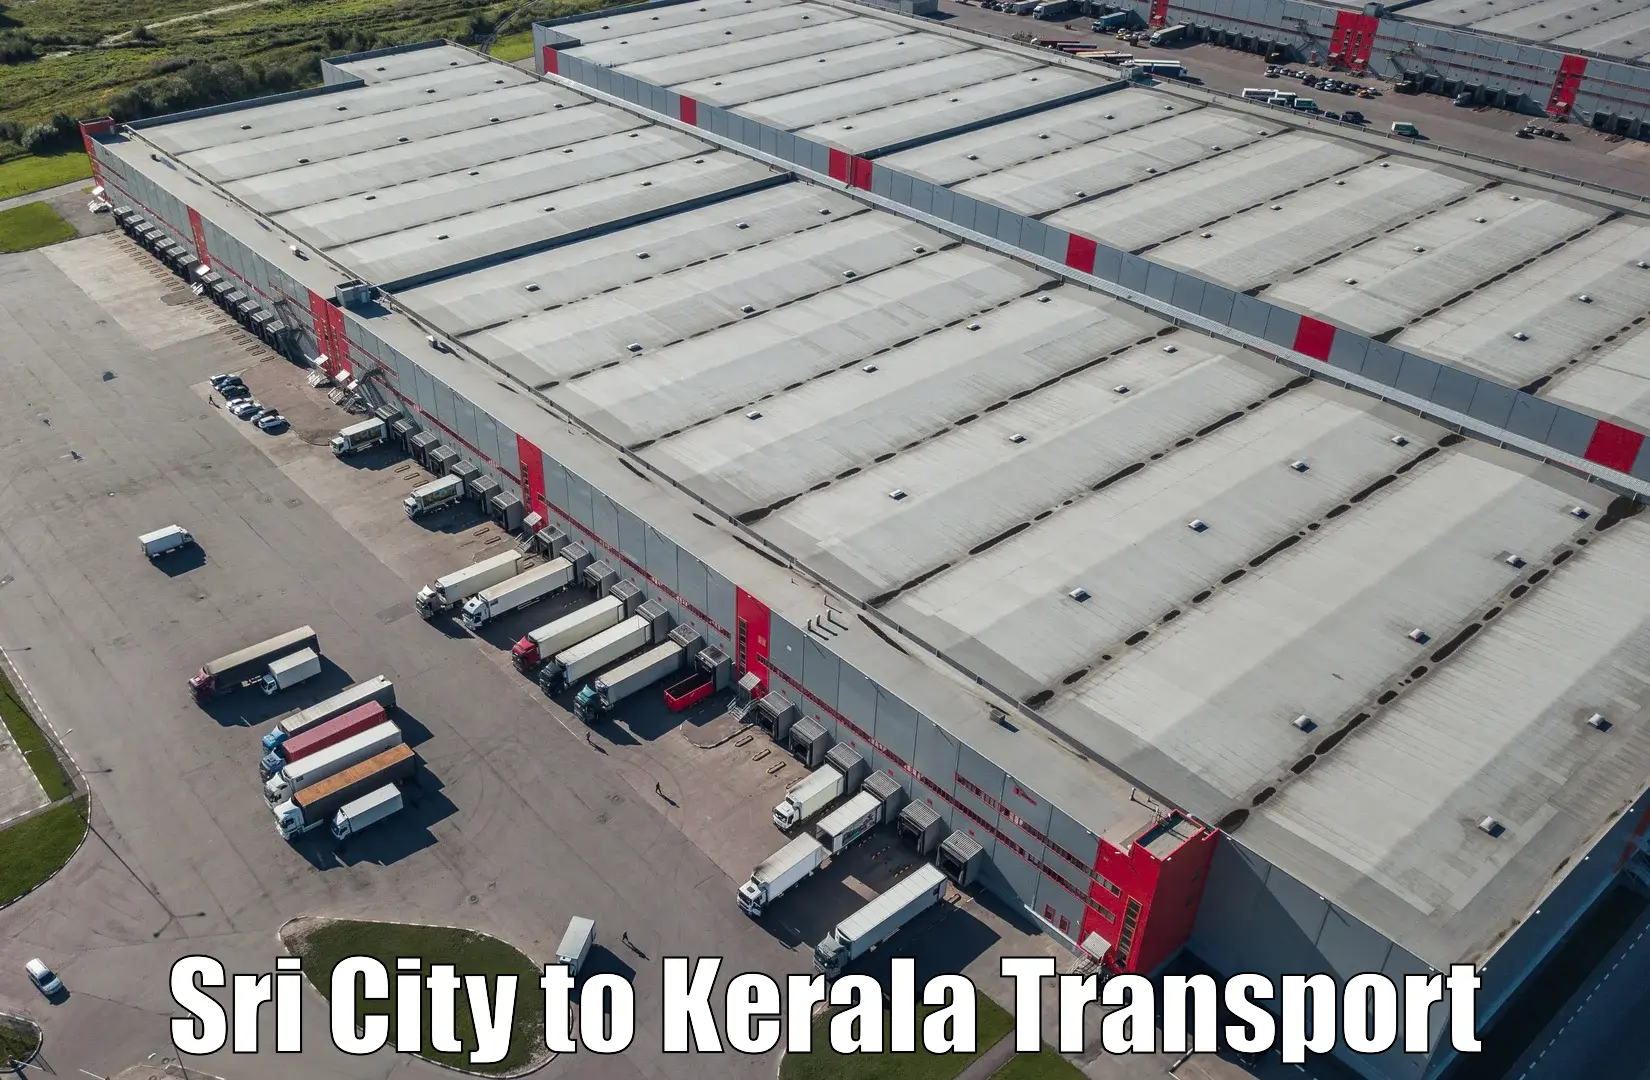 Goods delivery service Sri City to Ernakulam